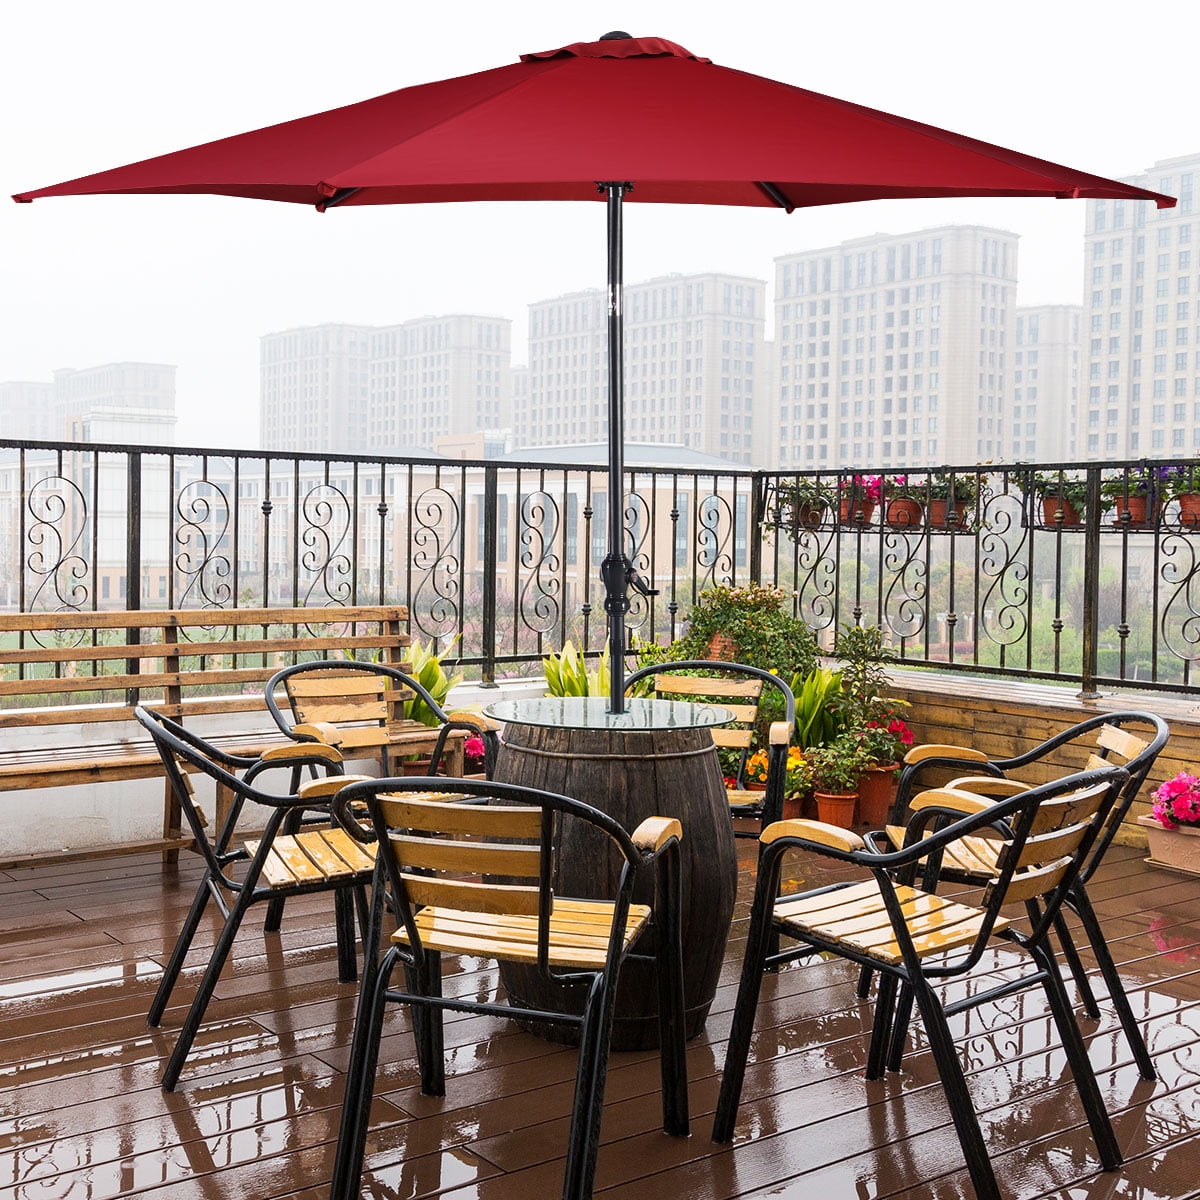 Details about   10ft Patio Umbrella with 6 Sturdy Ribs Outdoor Market Table Umbrellas Red 